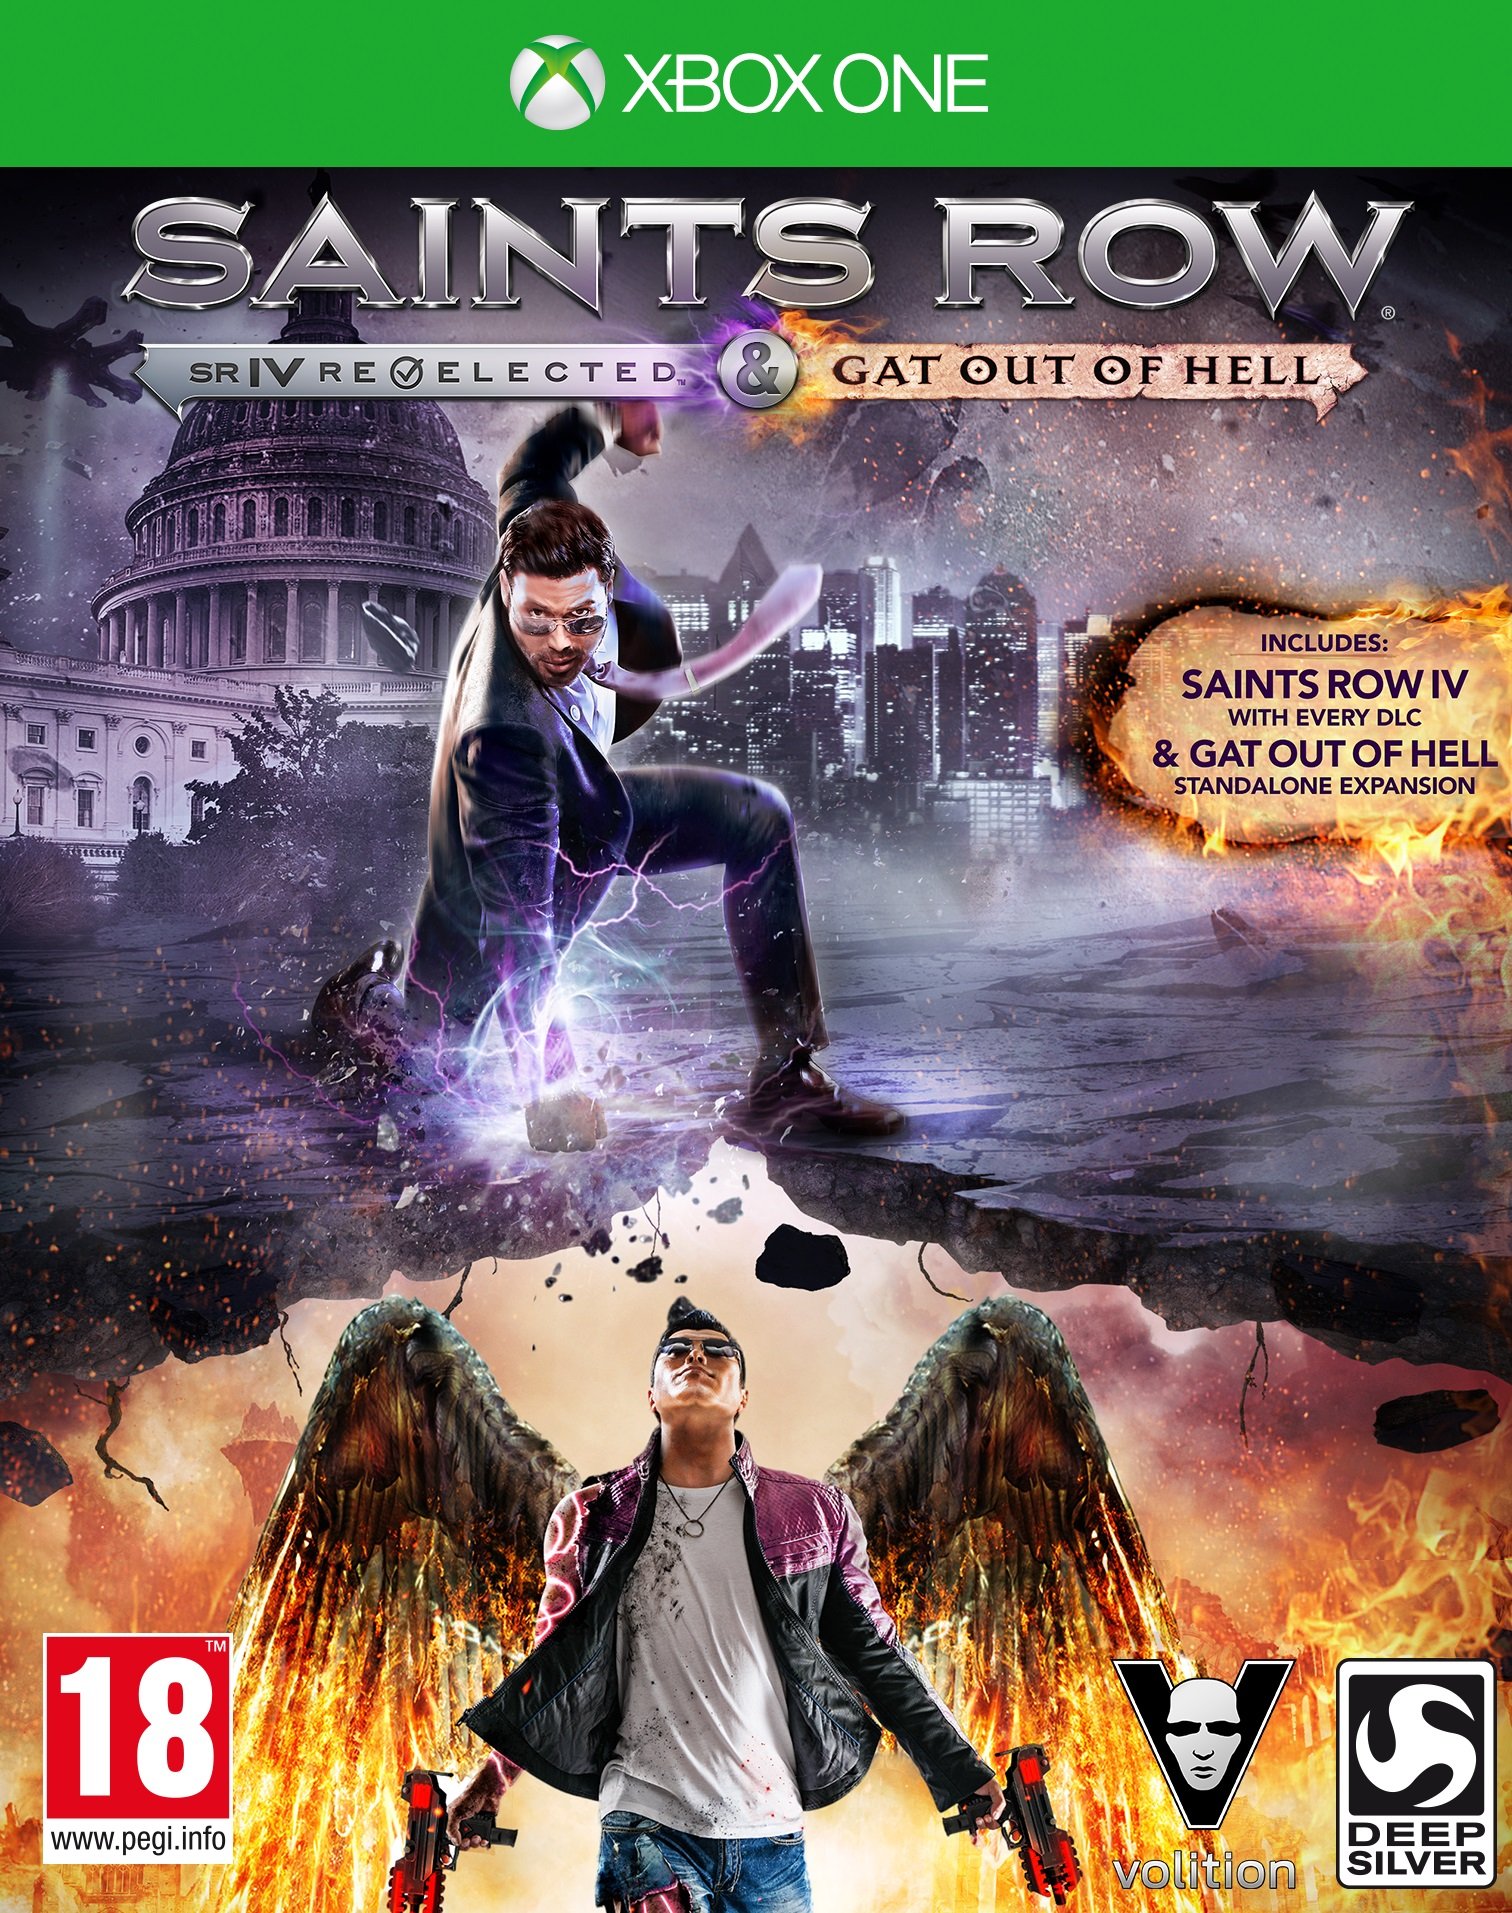 download saints row iv re elected